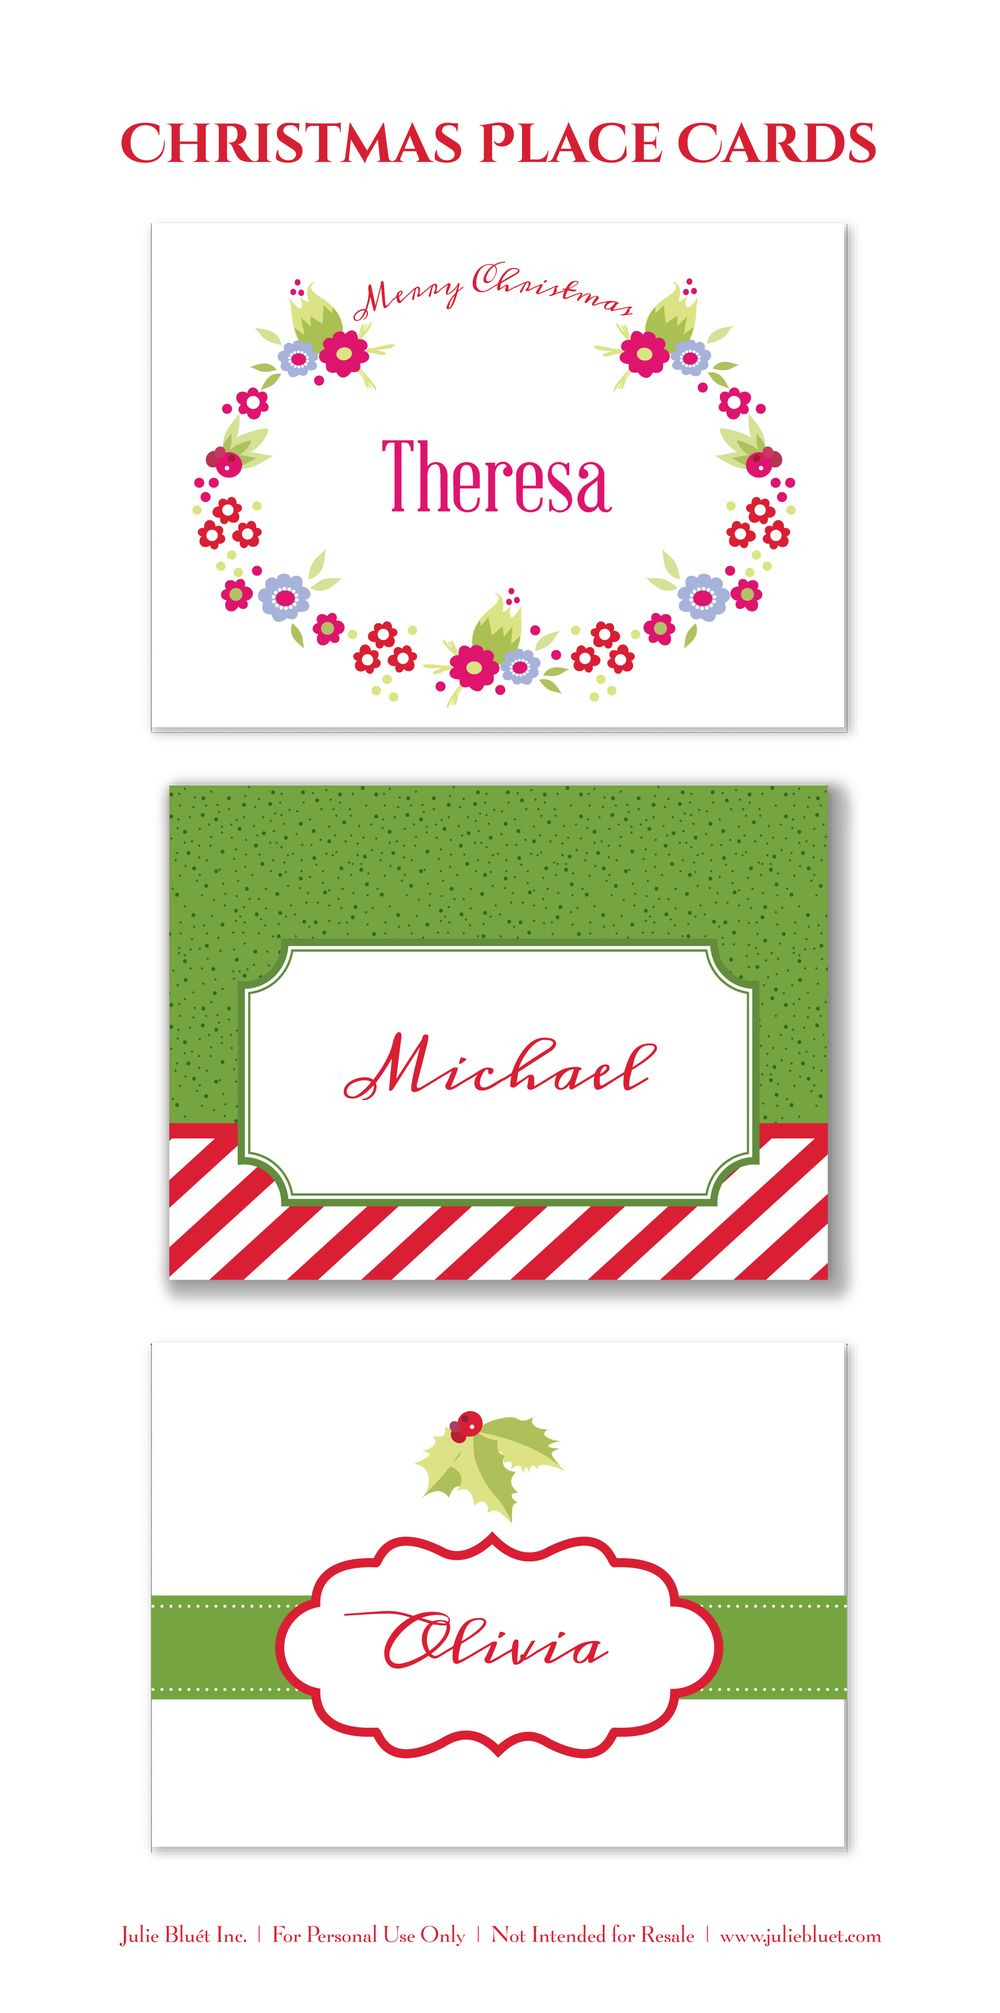 Here Are Three Free Printable Christmas Place Cards For Your Holiday - Free Printable Place Cards